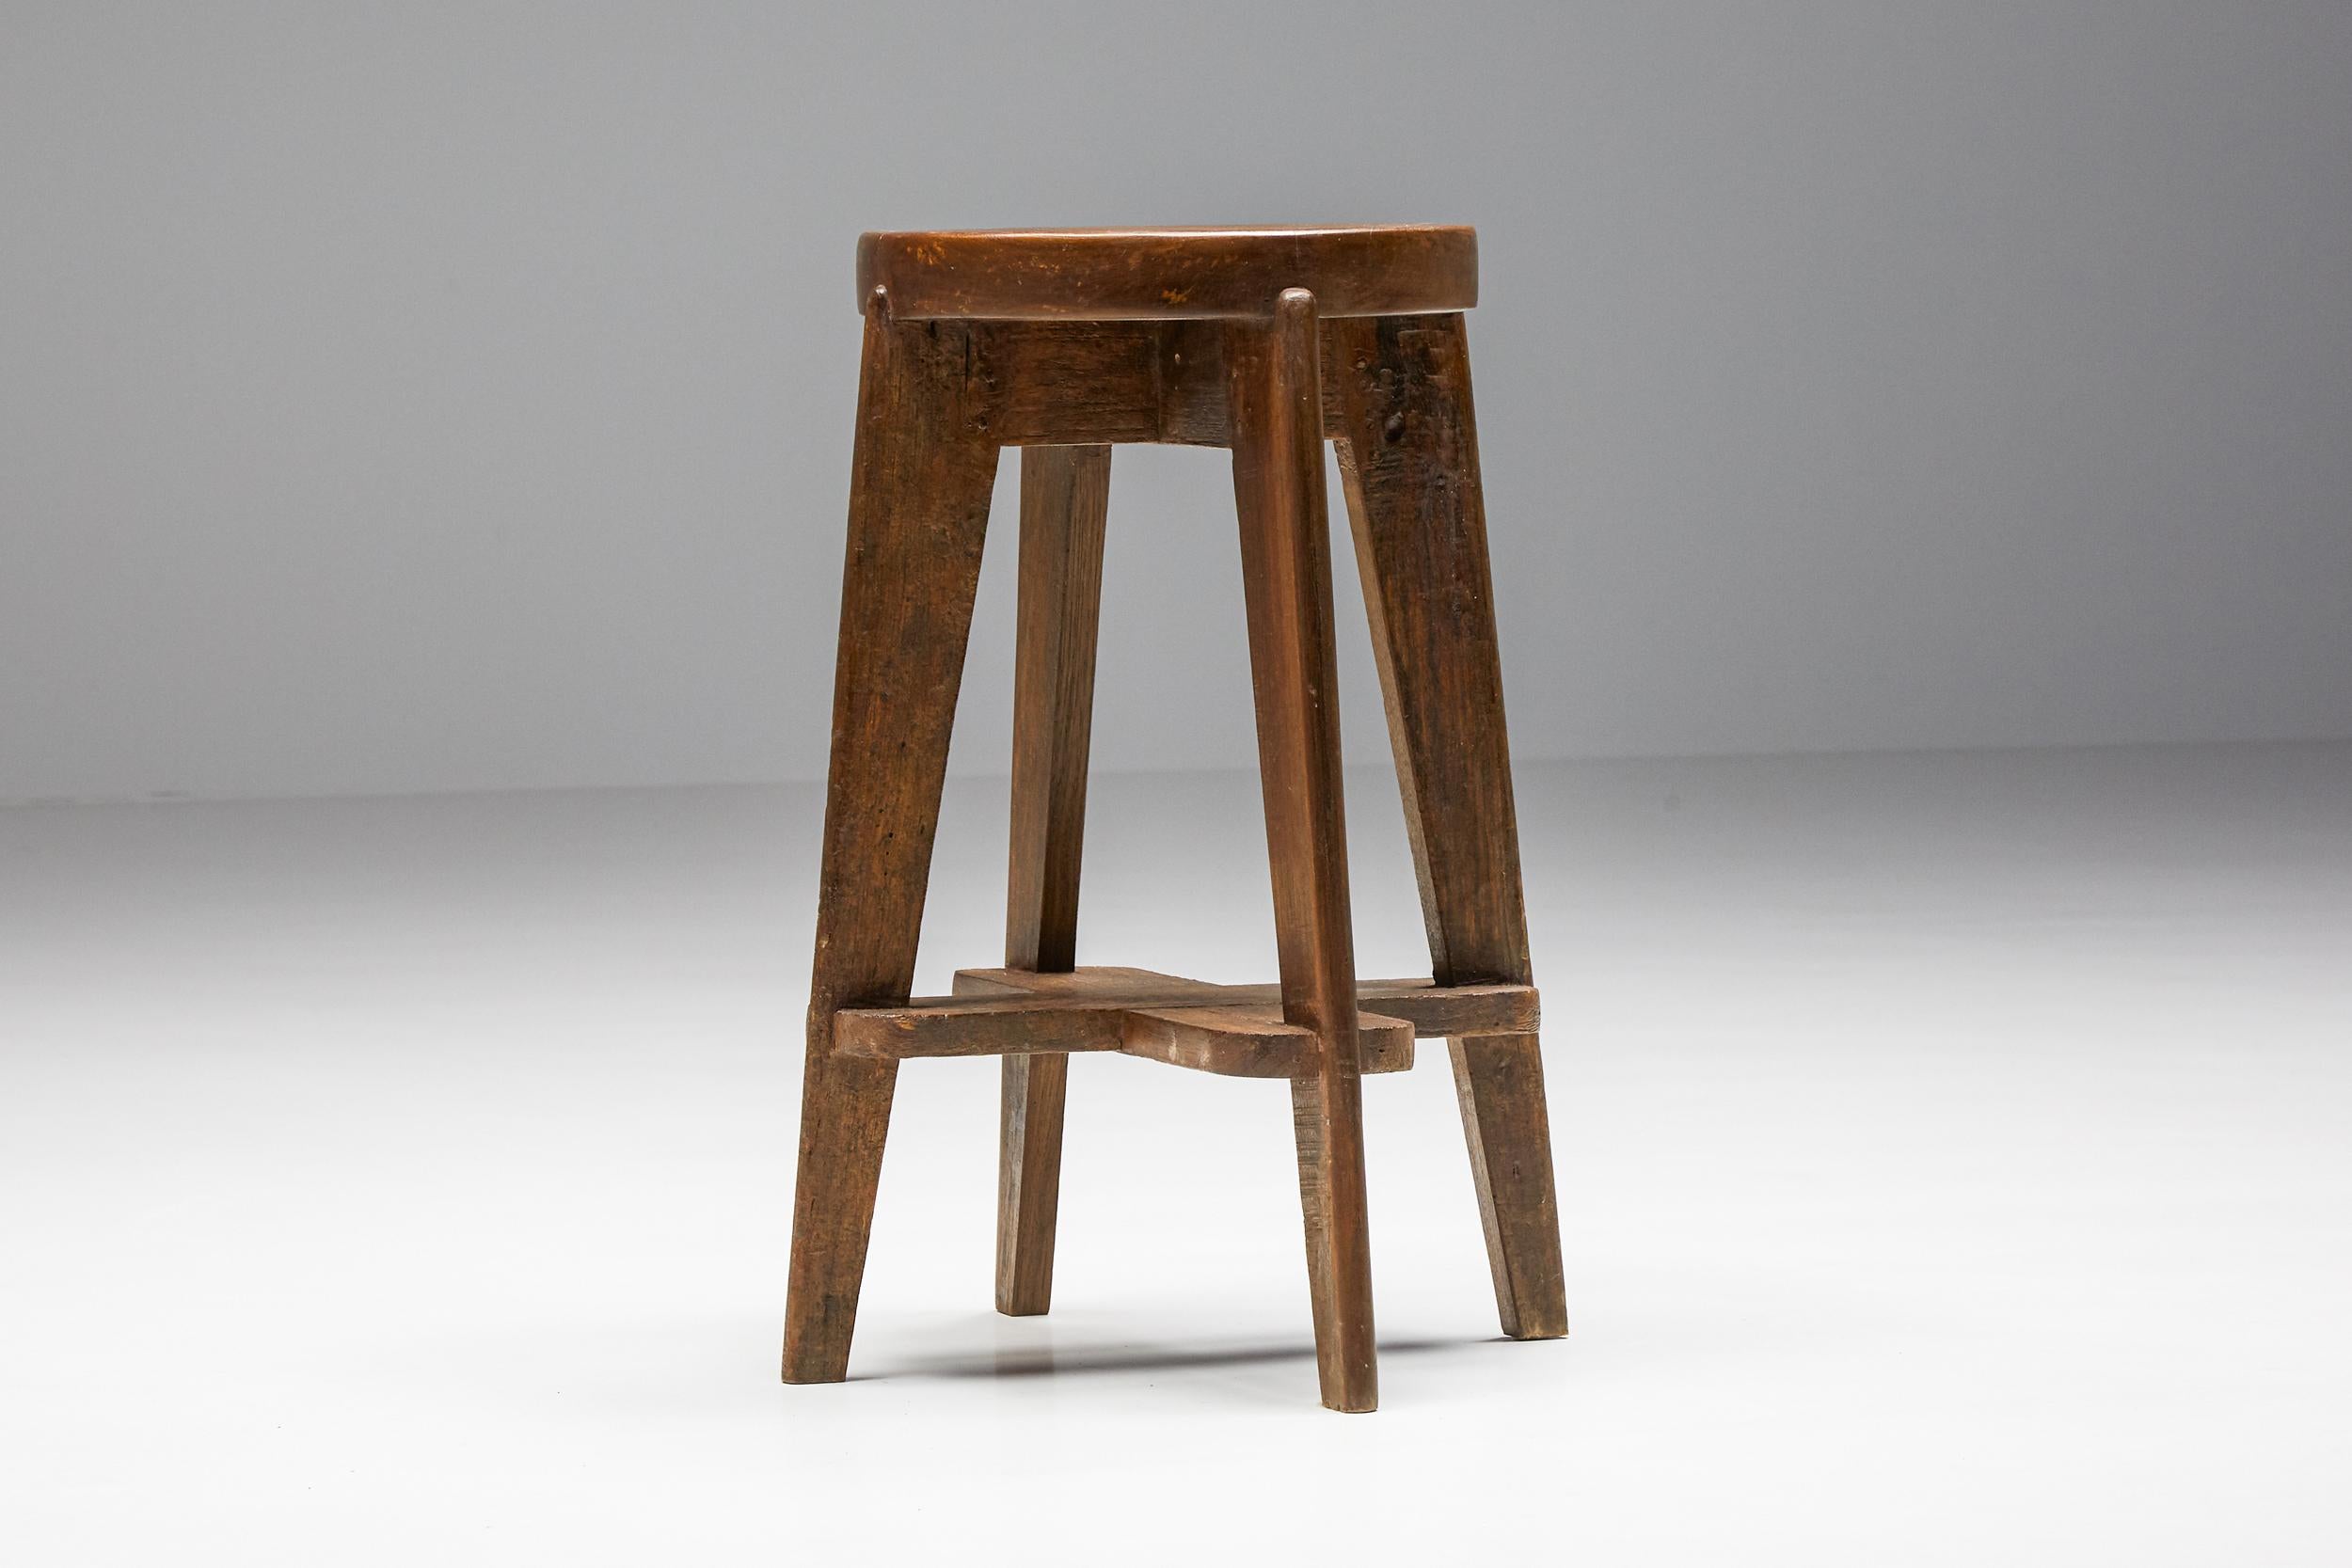 Pierre Jeanneret Chandigarh Stools 'CB', Postmodern influenced by Le Corbusier  2